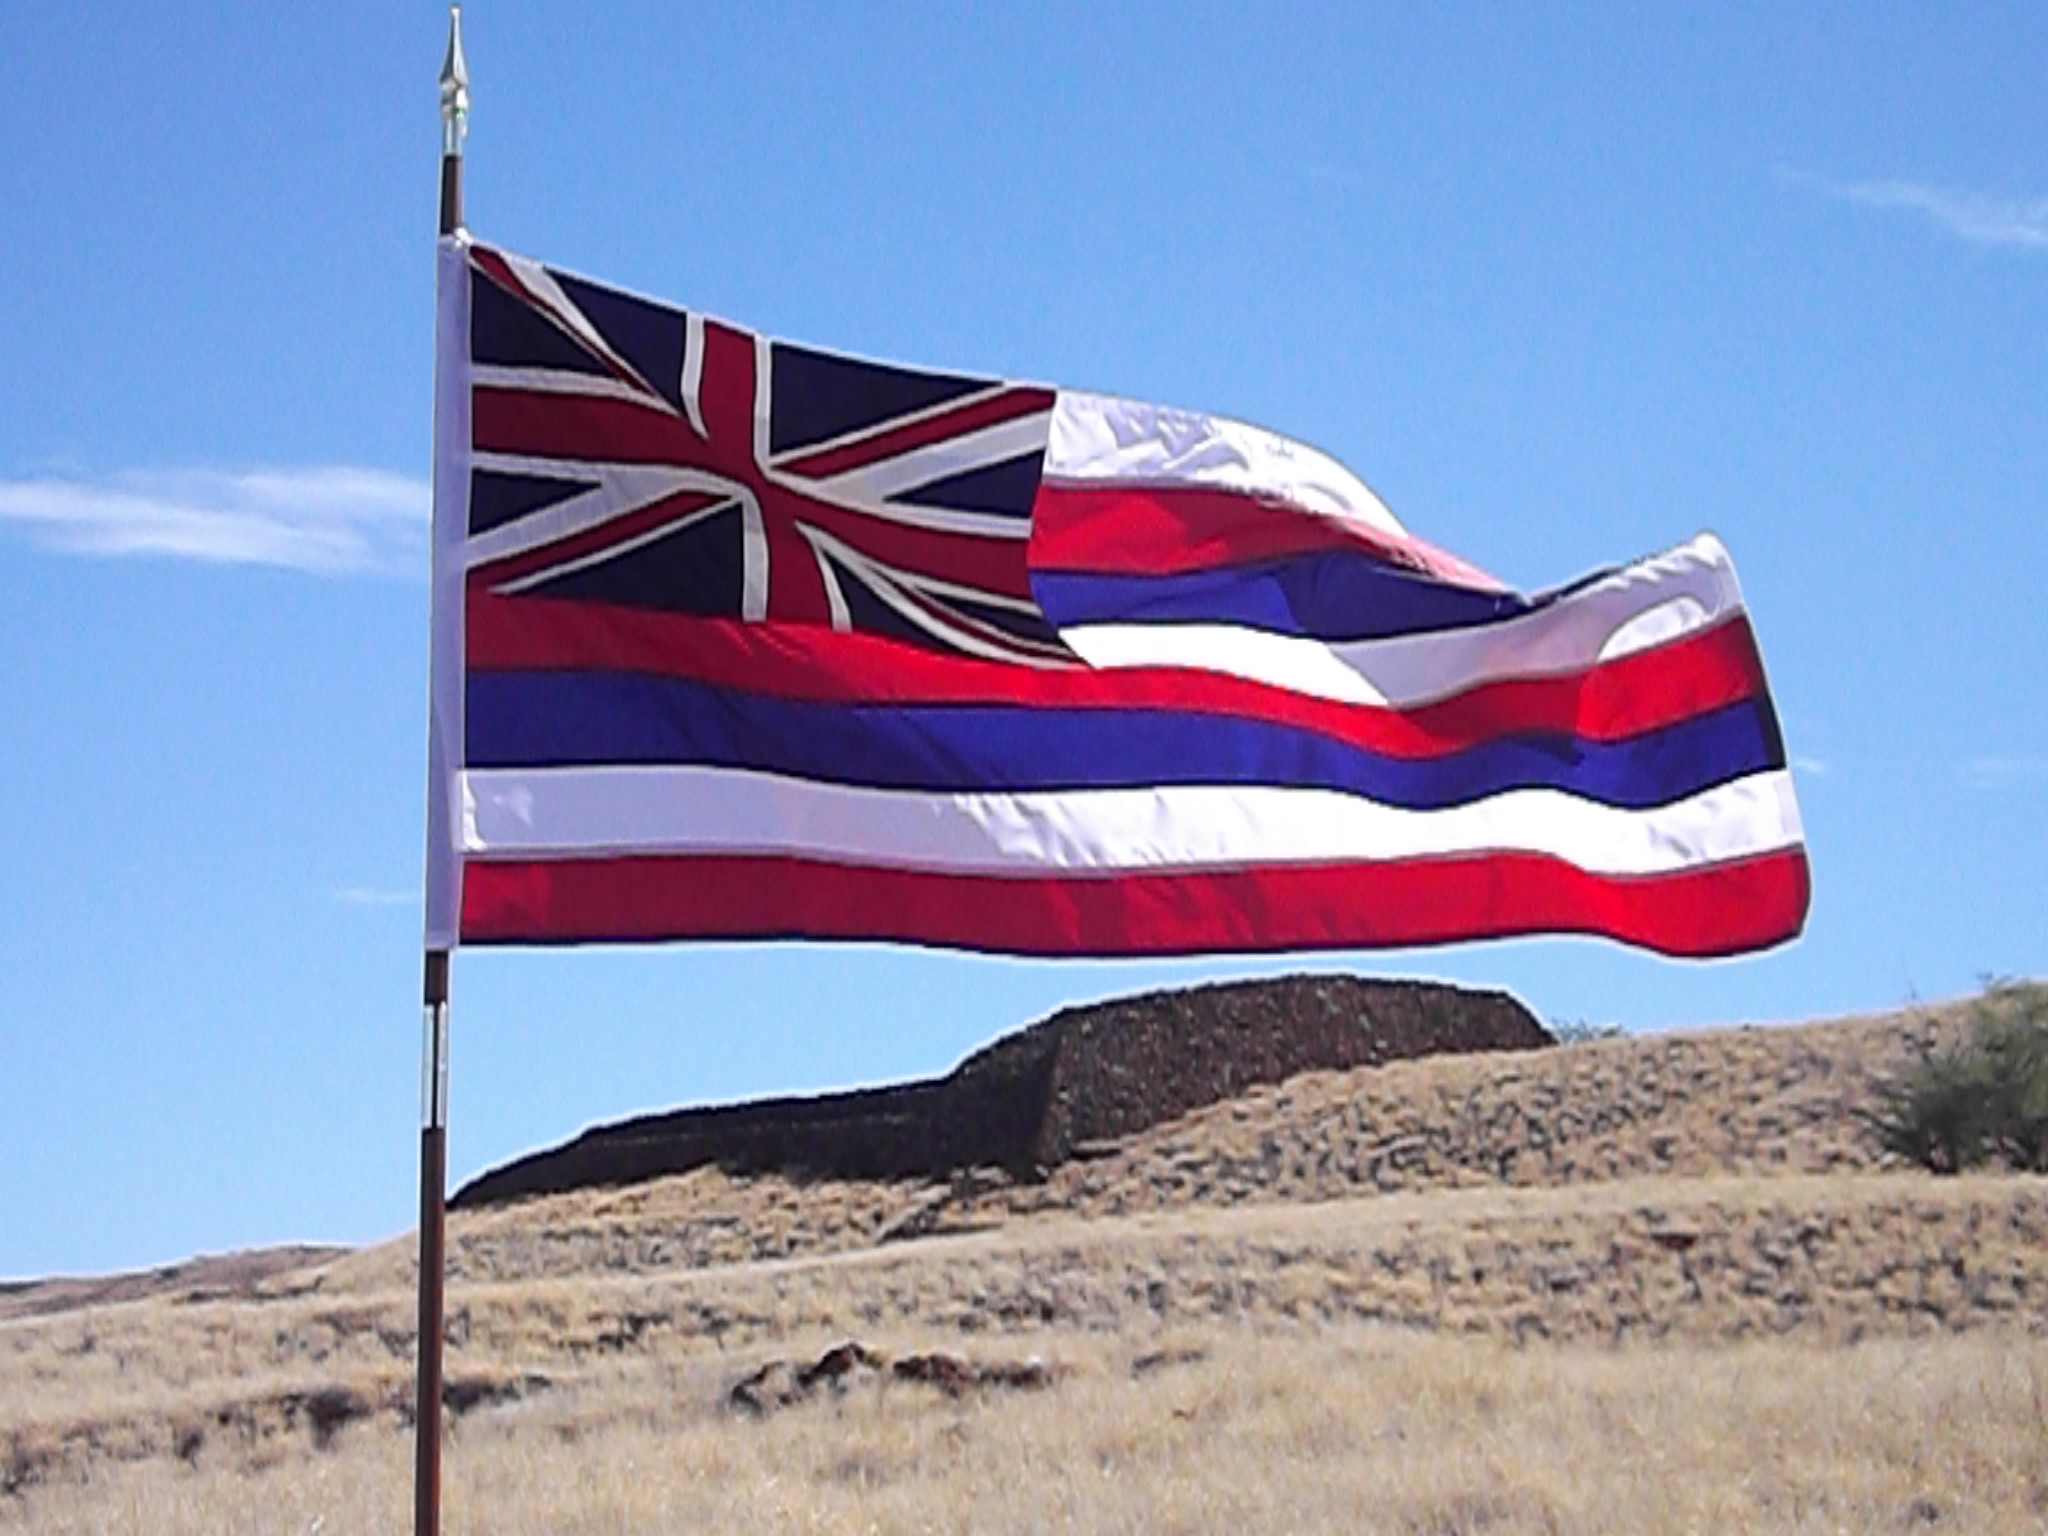 Hawaii to celebrate its Flag Day.